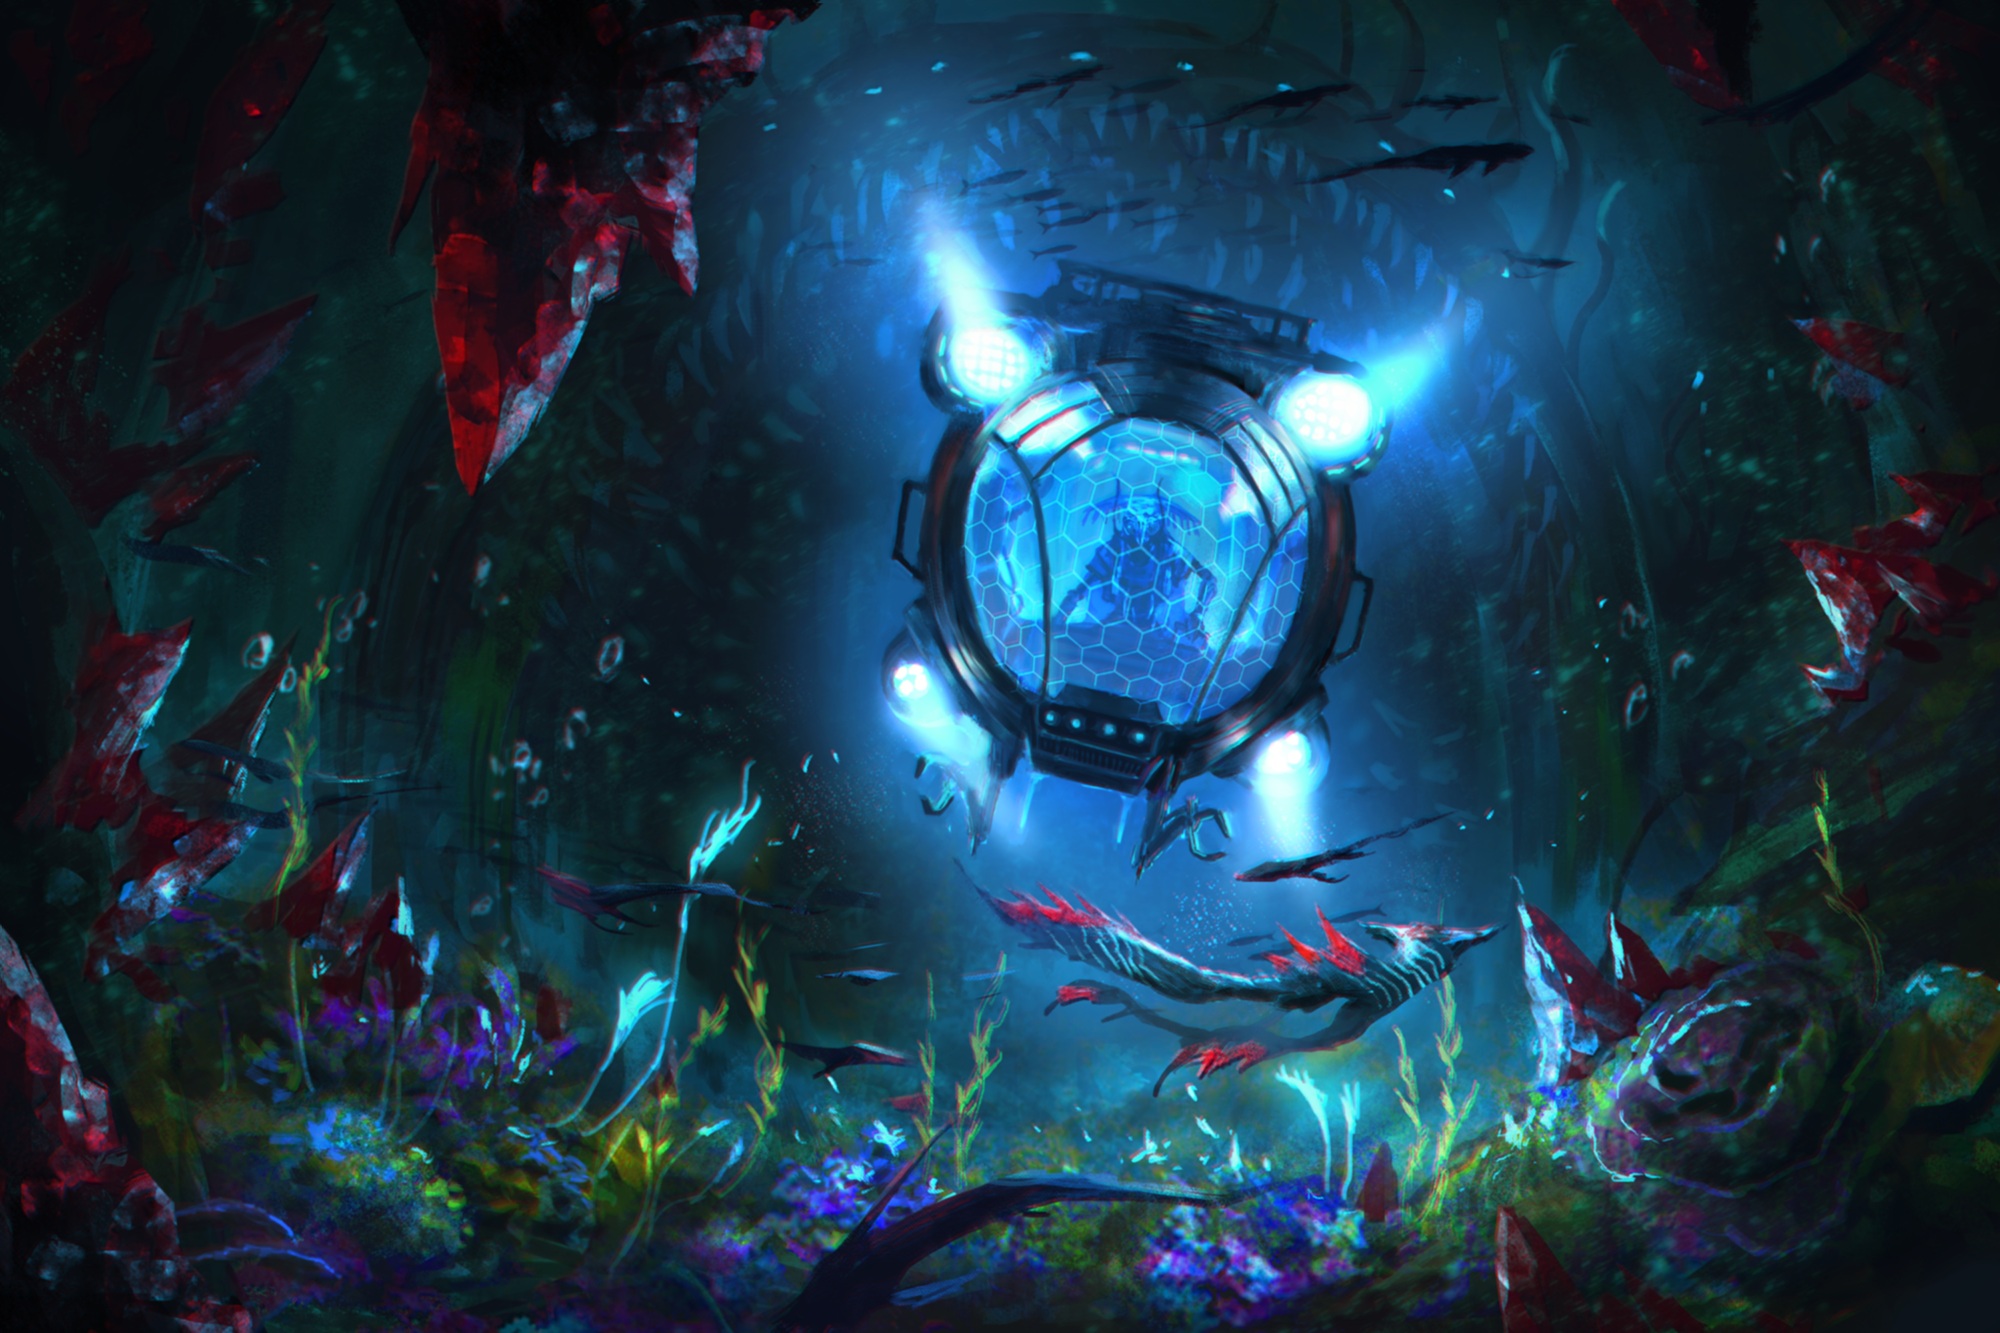 The iconic shirren mystic is underwater in a submersible, examining a small alien fish, while a giant creature with a gaping maw looms behind him.]